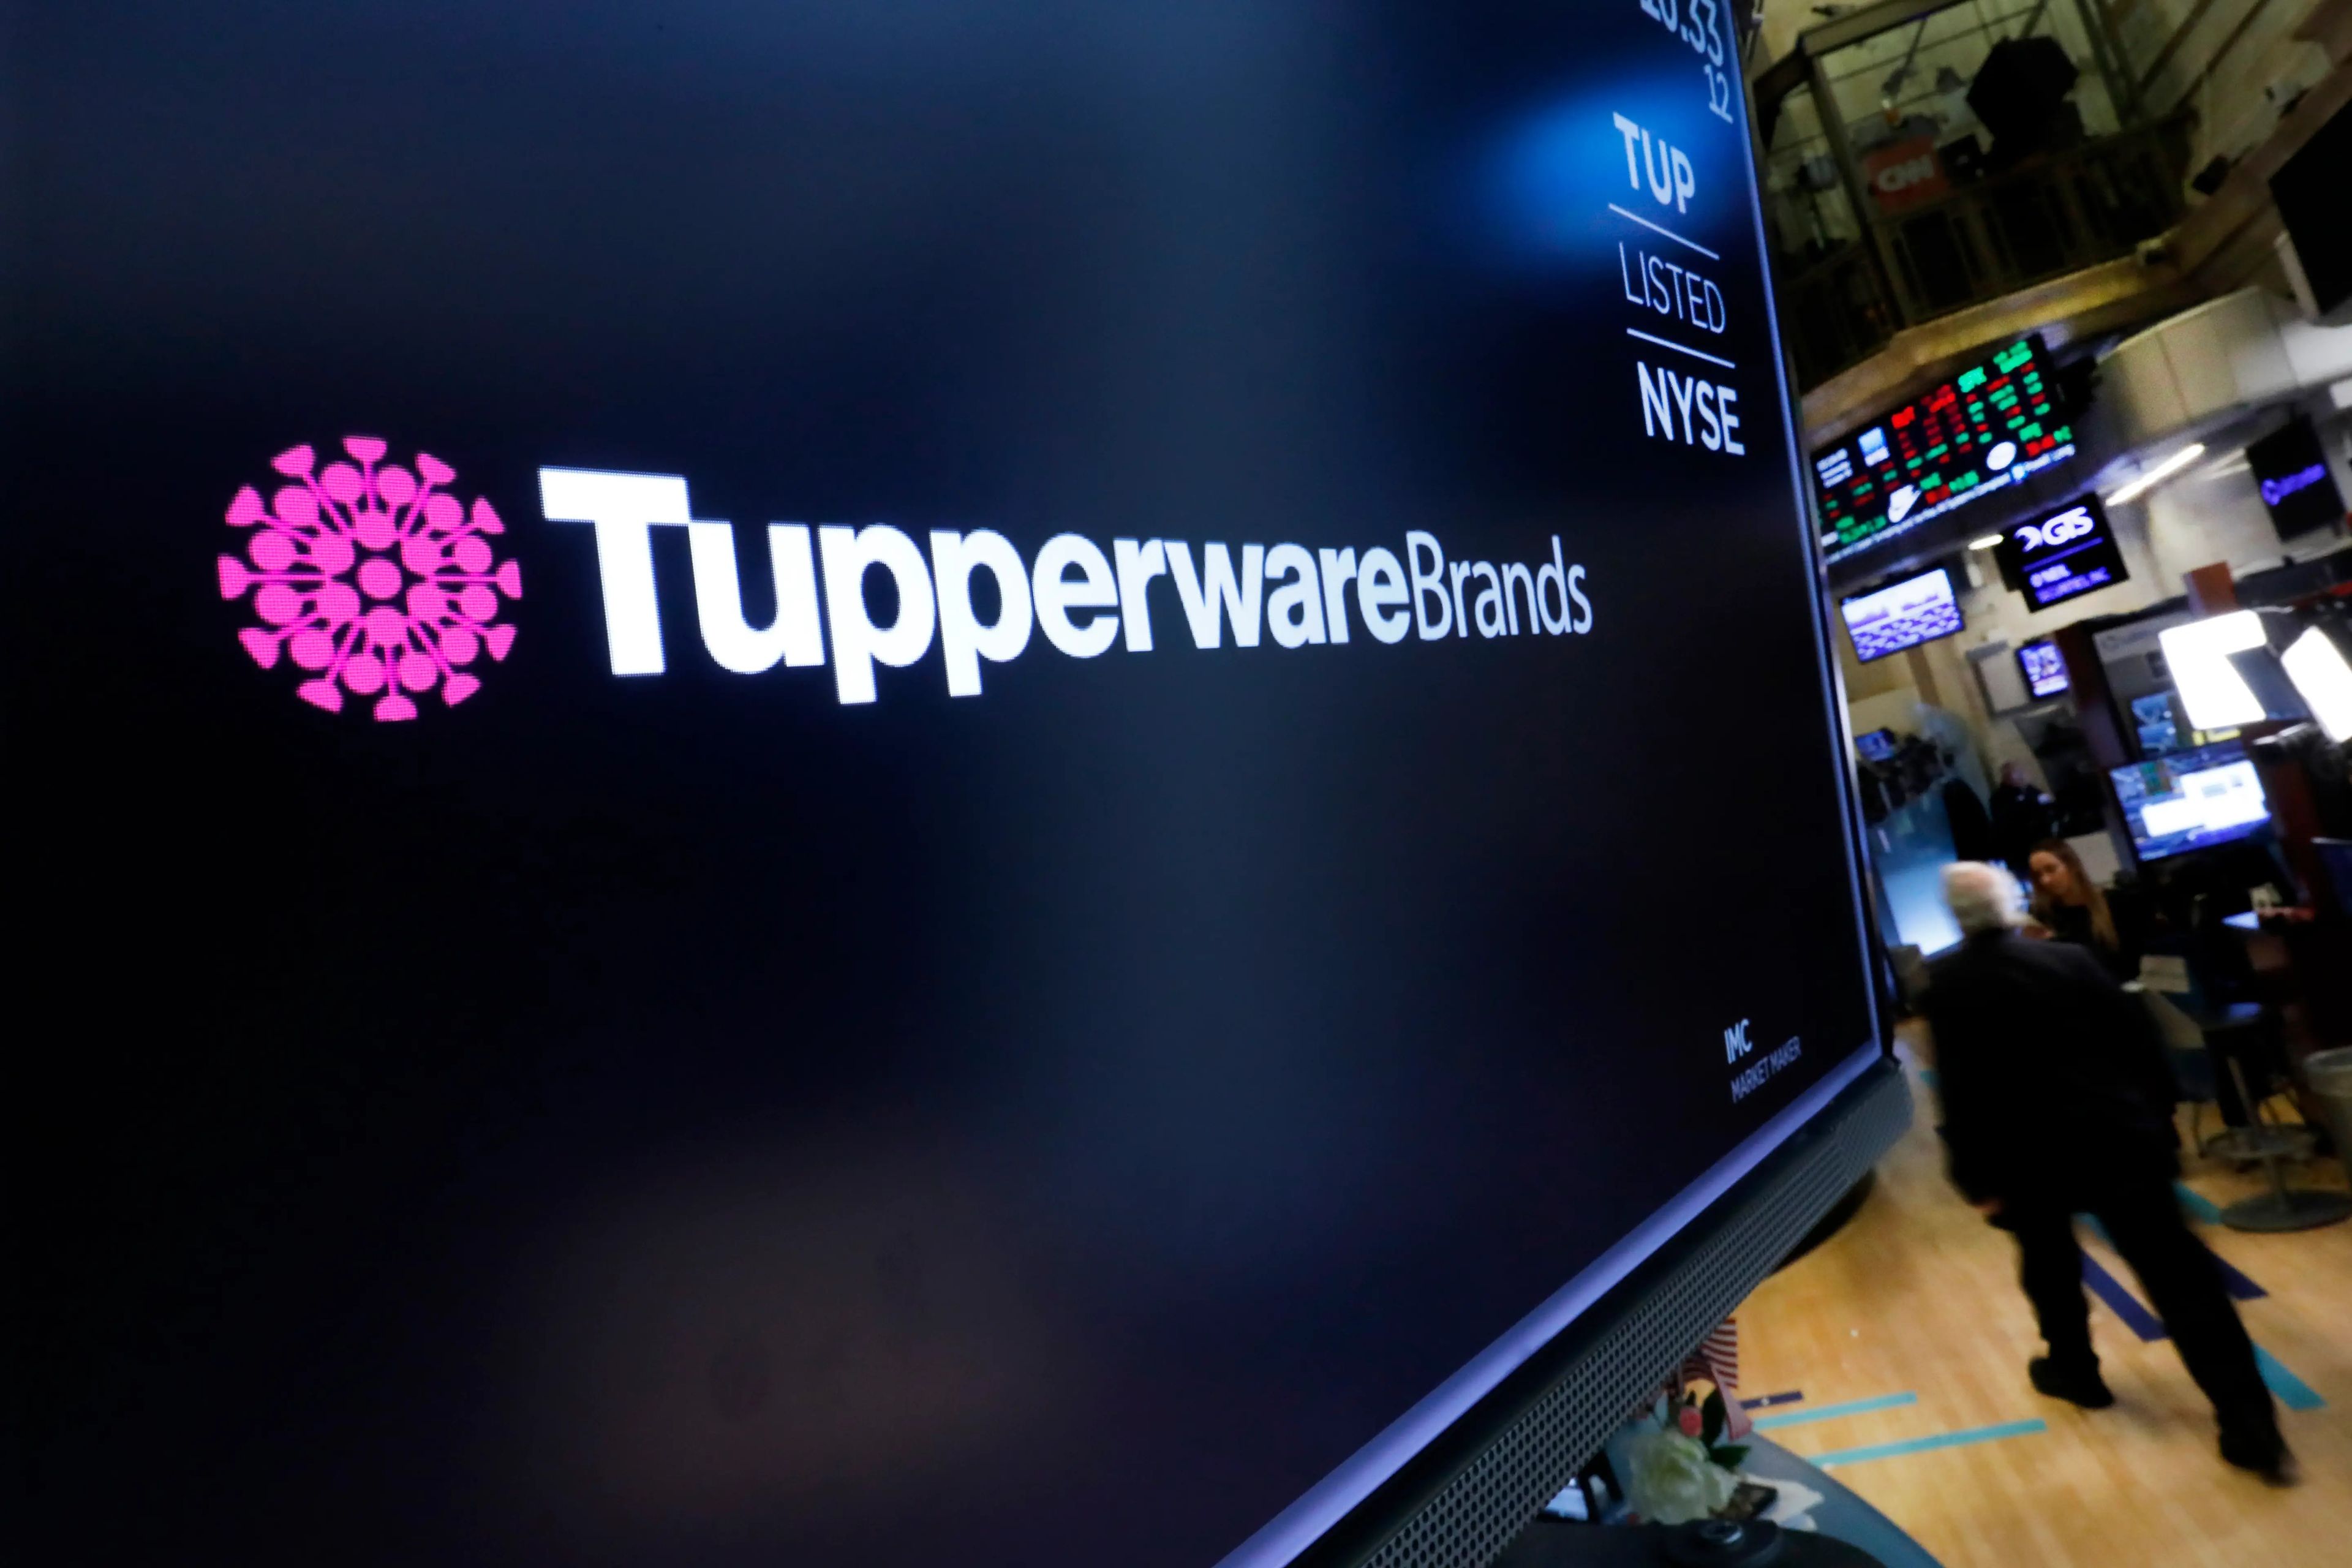 The Tupperware Brands logo and name appears on a screen on the floor of the New York Stock Exchange in 2022.